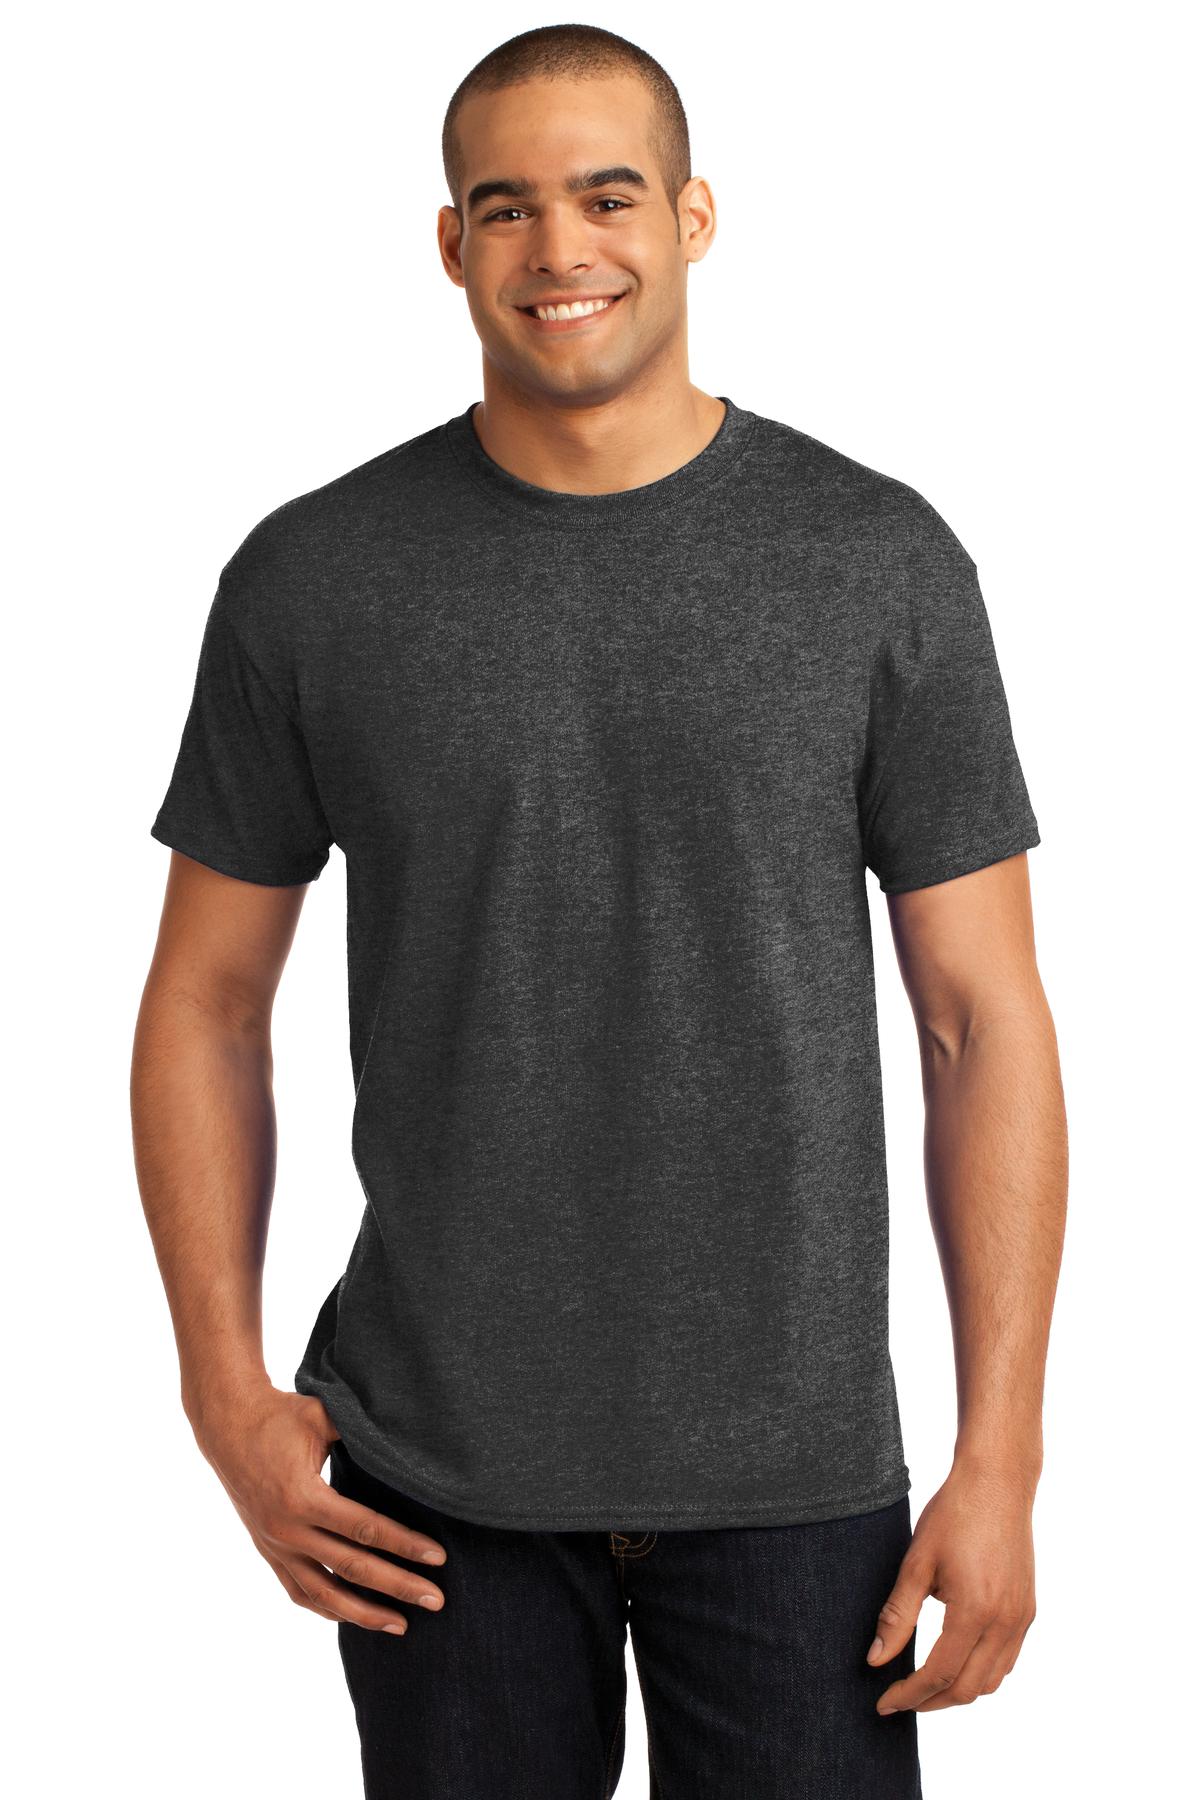 T-Shirts Charcoal Heather Hanes